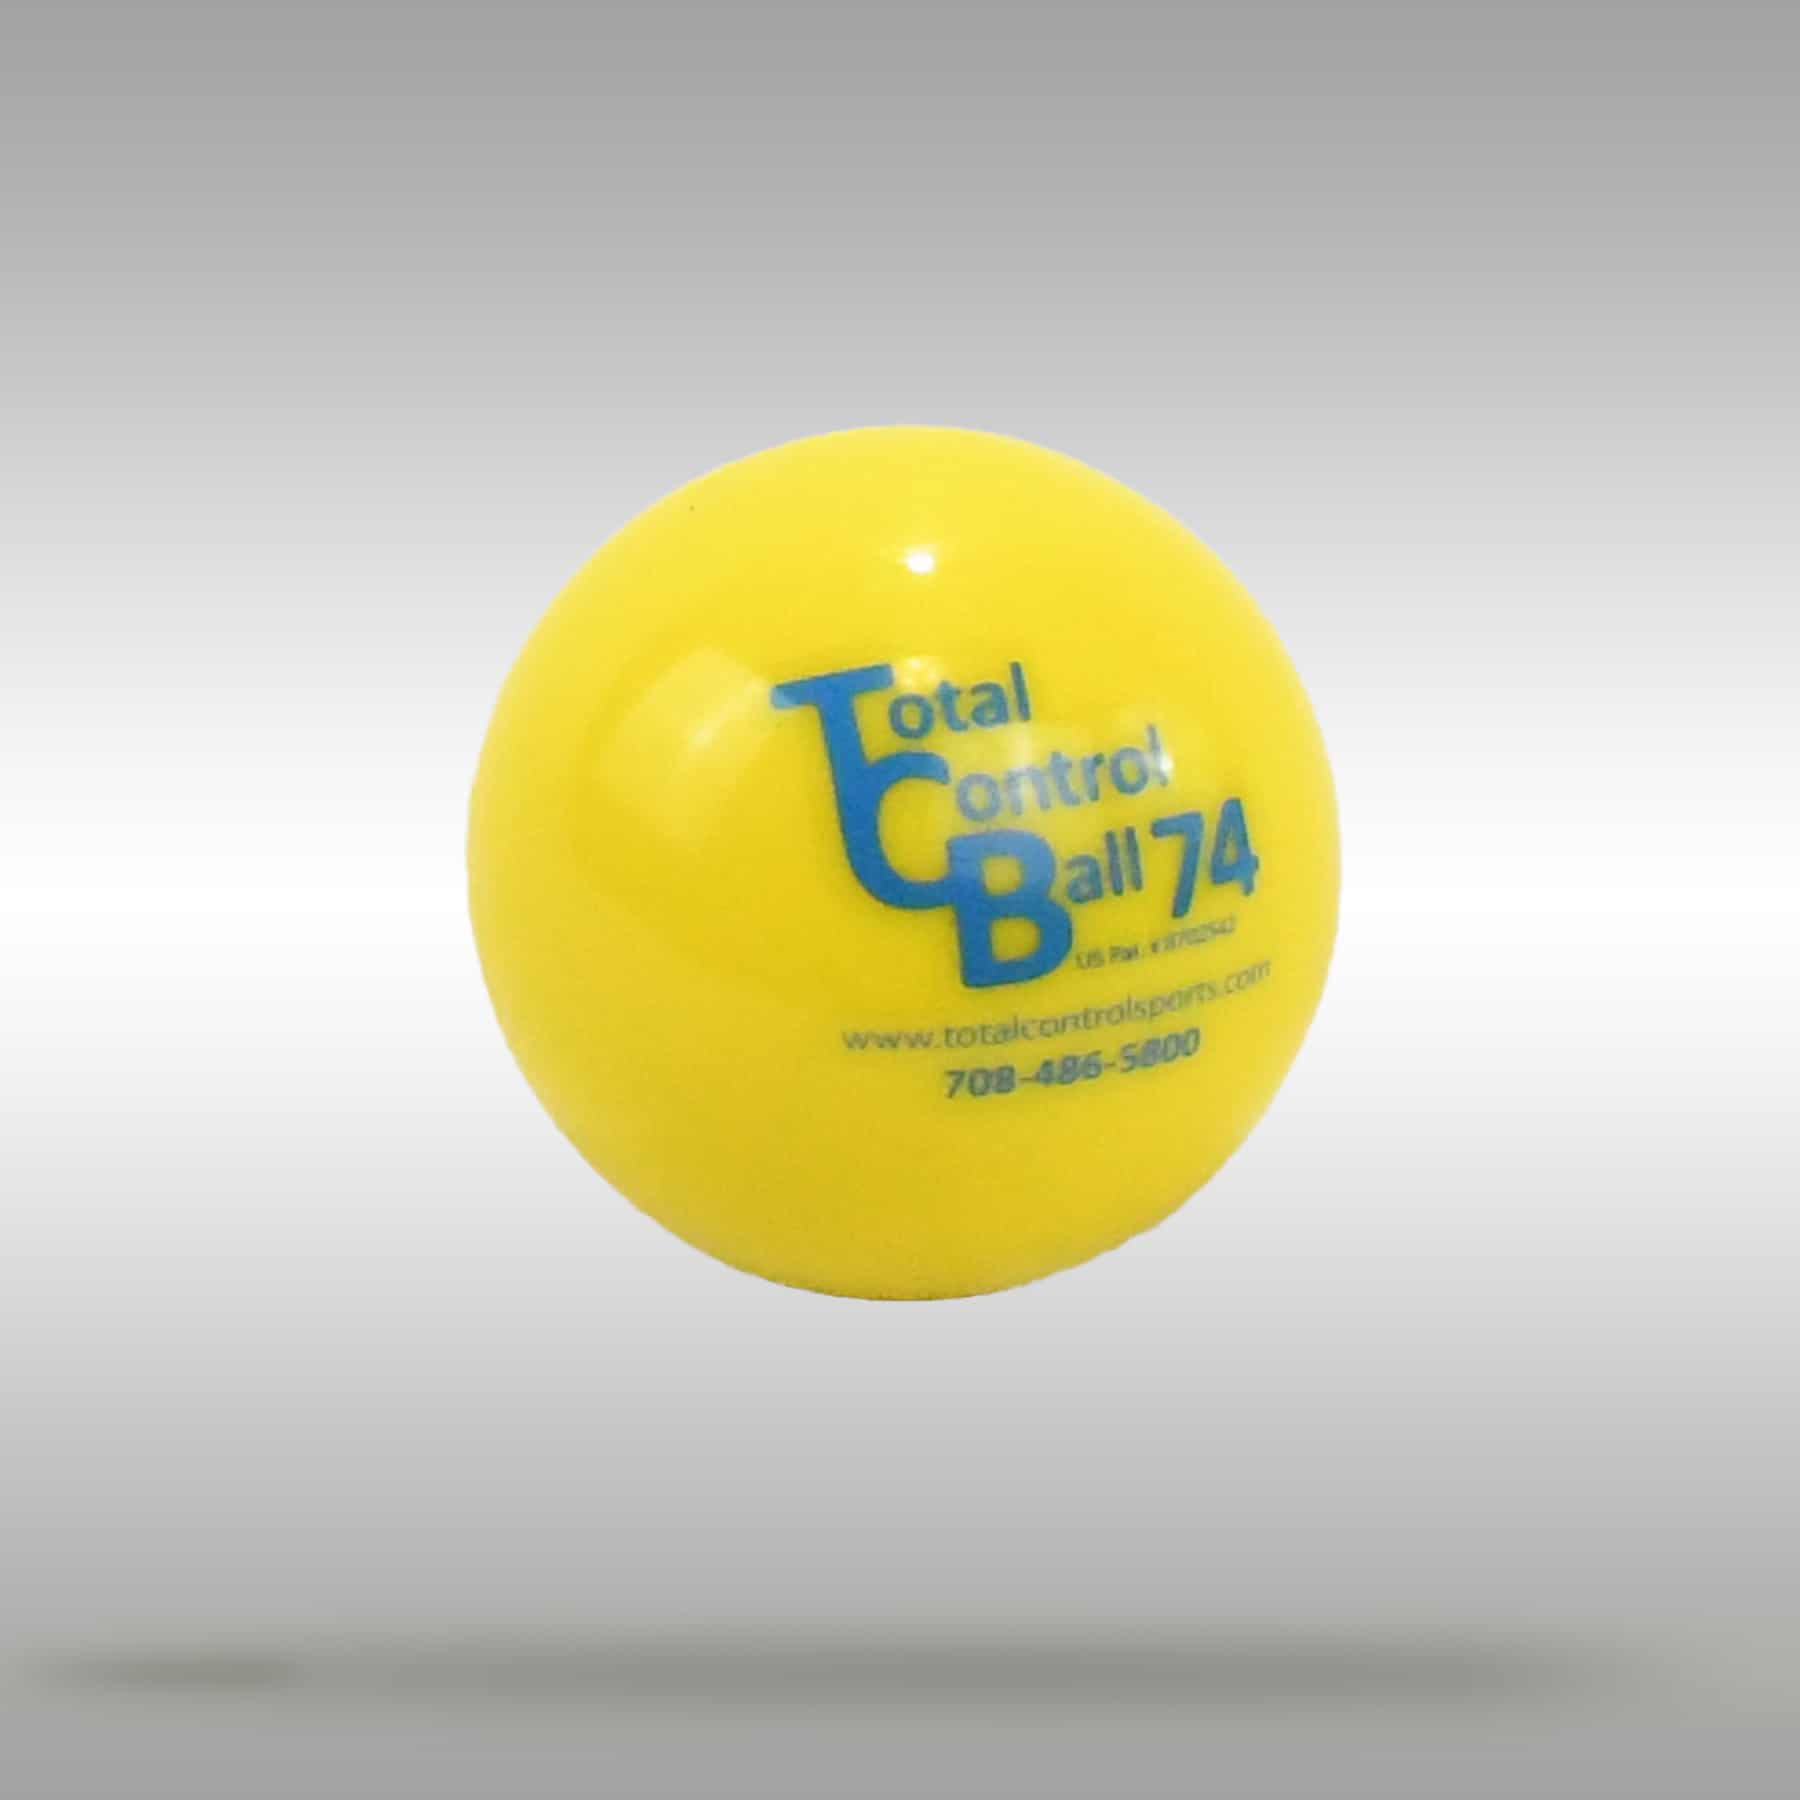 Total Control Sports TCBYH80 3.2 Training Standard Hole Ball 80 - Yellow  for sale online